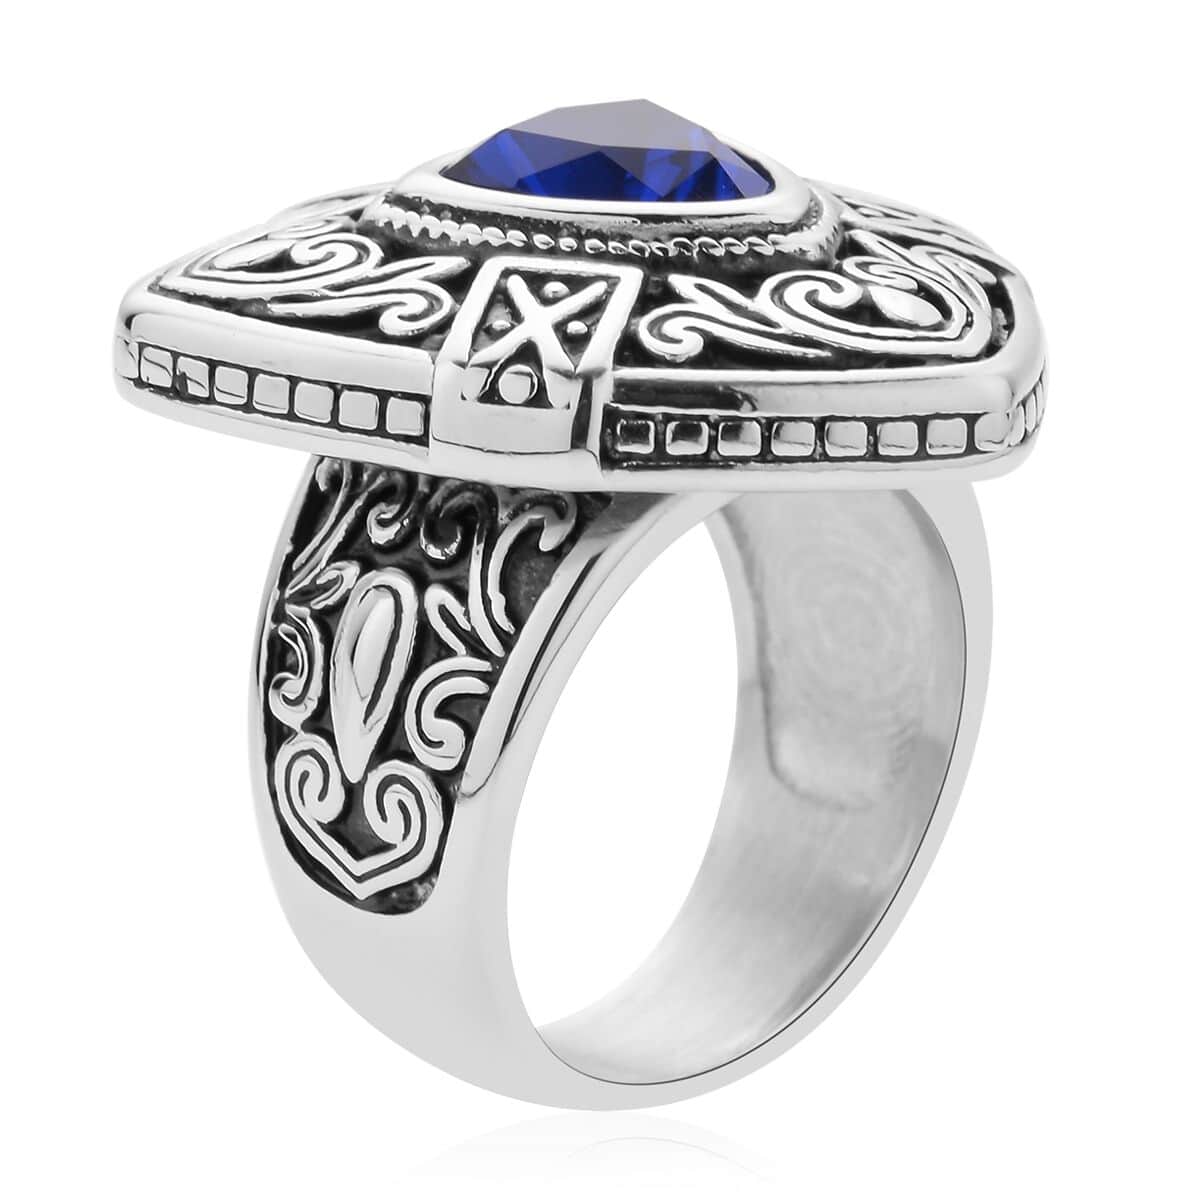 Simulated Blue Diamond Filigree Ring in Black Oxidized Stainless Steel (Size 10.0) image number 3